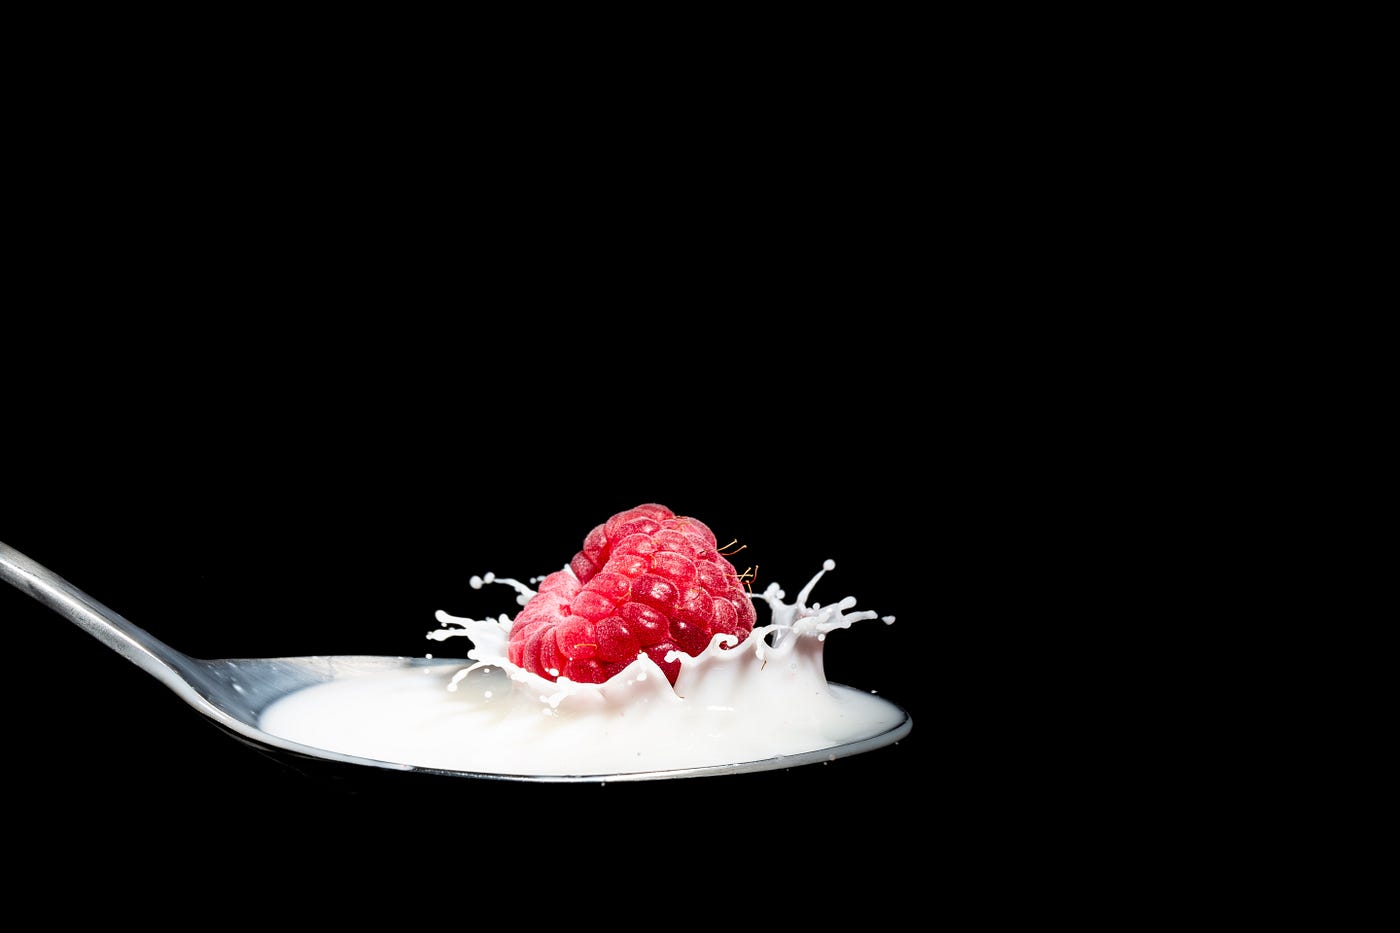 A spoon emerges from the lower left of the screen, holding milk/yogurt with a raspberry splashing into it.